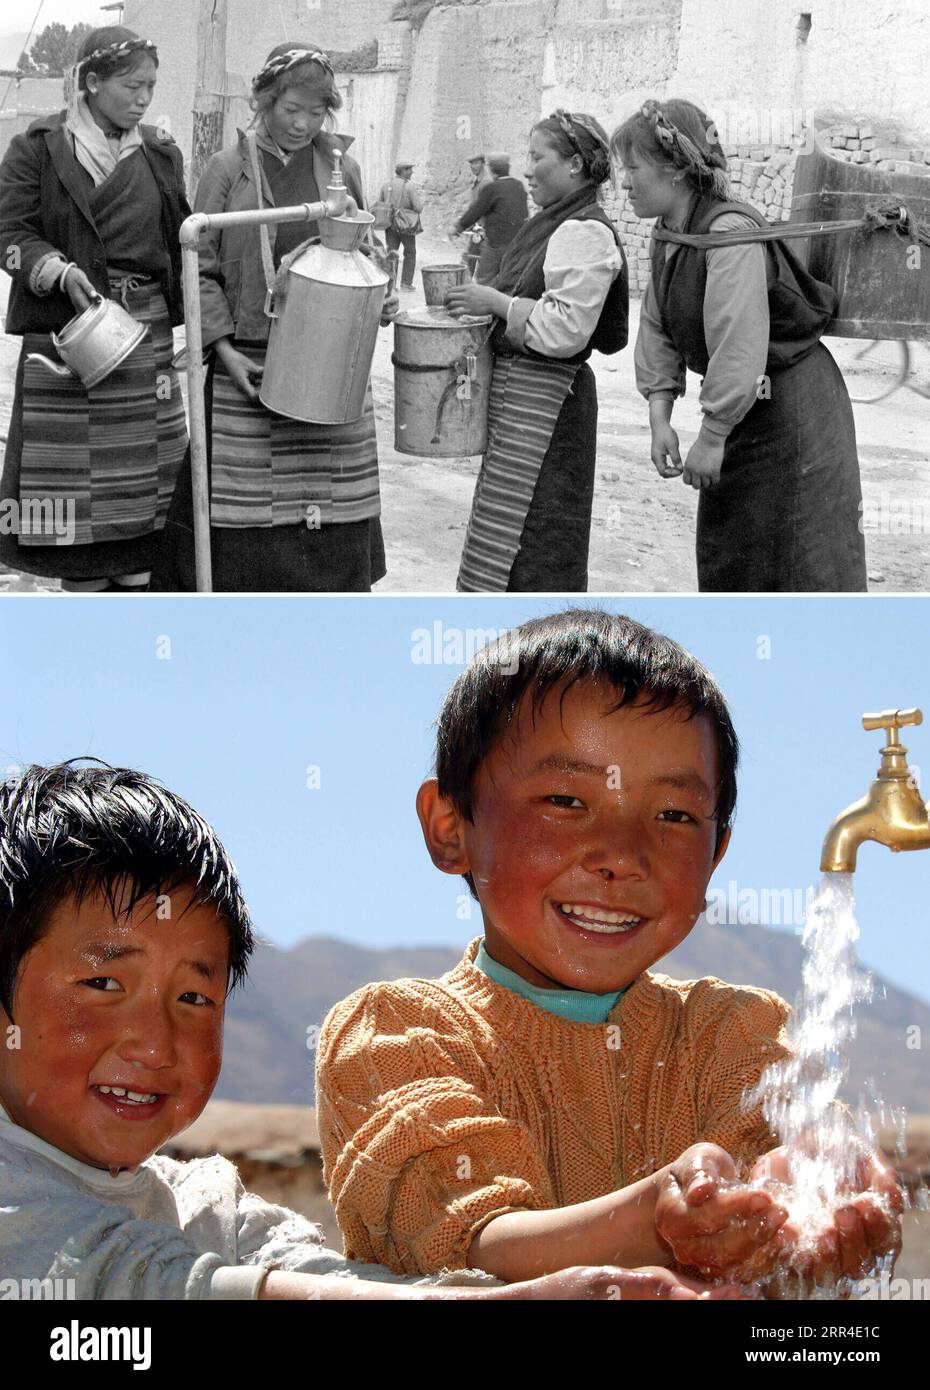 201201 -- LHASA, Dec. 1, 2020  -- In this combo photo, the upper part shows residents fetching tap water in Gyangze Township of southwest China s Tibet Autonomous Region. Local people used to collect water from sources far away until a small tap water plant was established during the 1980s in the township to provide safe drinking water. The lower part shows children washing up with tap water in Dagze County now Dagze District of Lhasa City, capital of the Tibet Autonomous Region. From 2016 to 2020, Tibet Autonomous Region invested 4.3 billion yuan about 657 million U.S. dollars in drinking wat Stock Photo